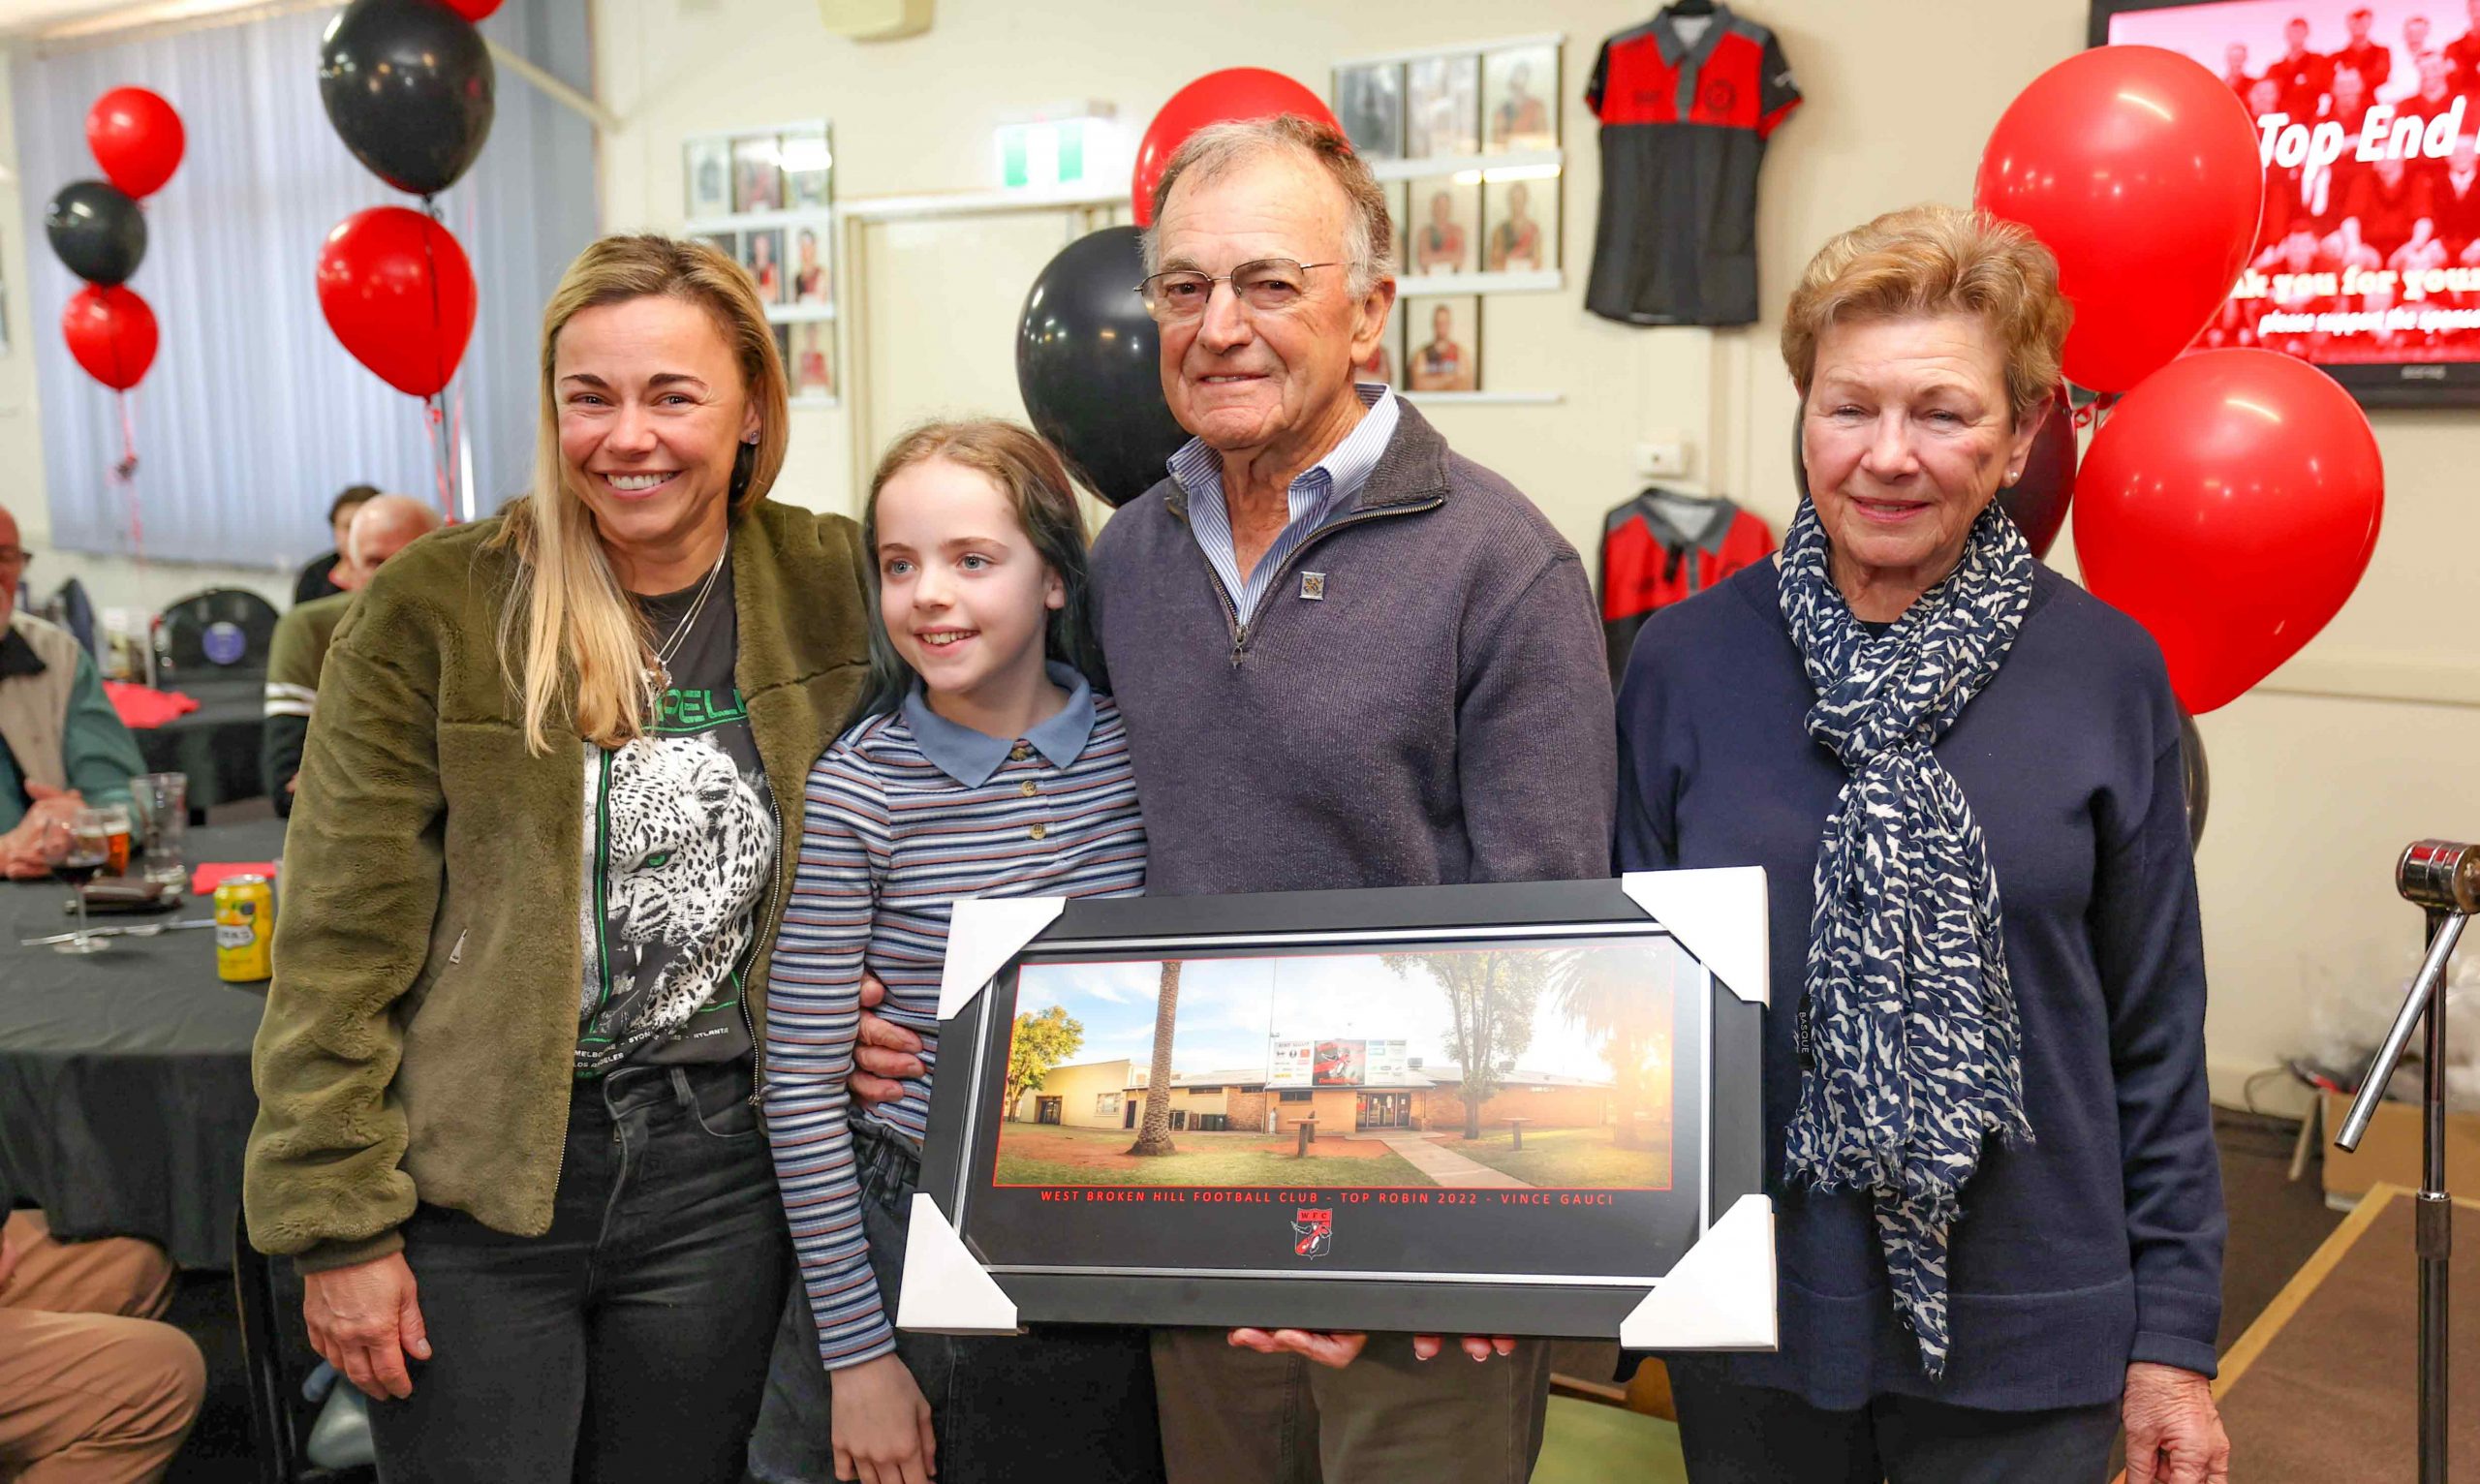 Vince Gauci with his family (daughter, granddaughter and wife).